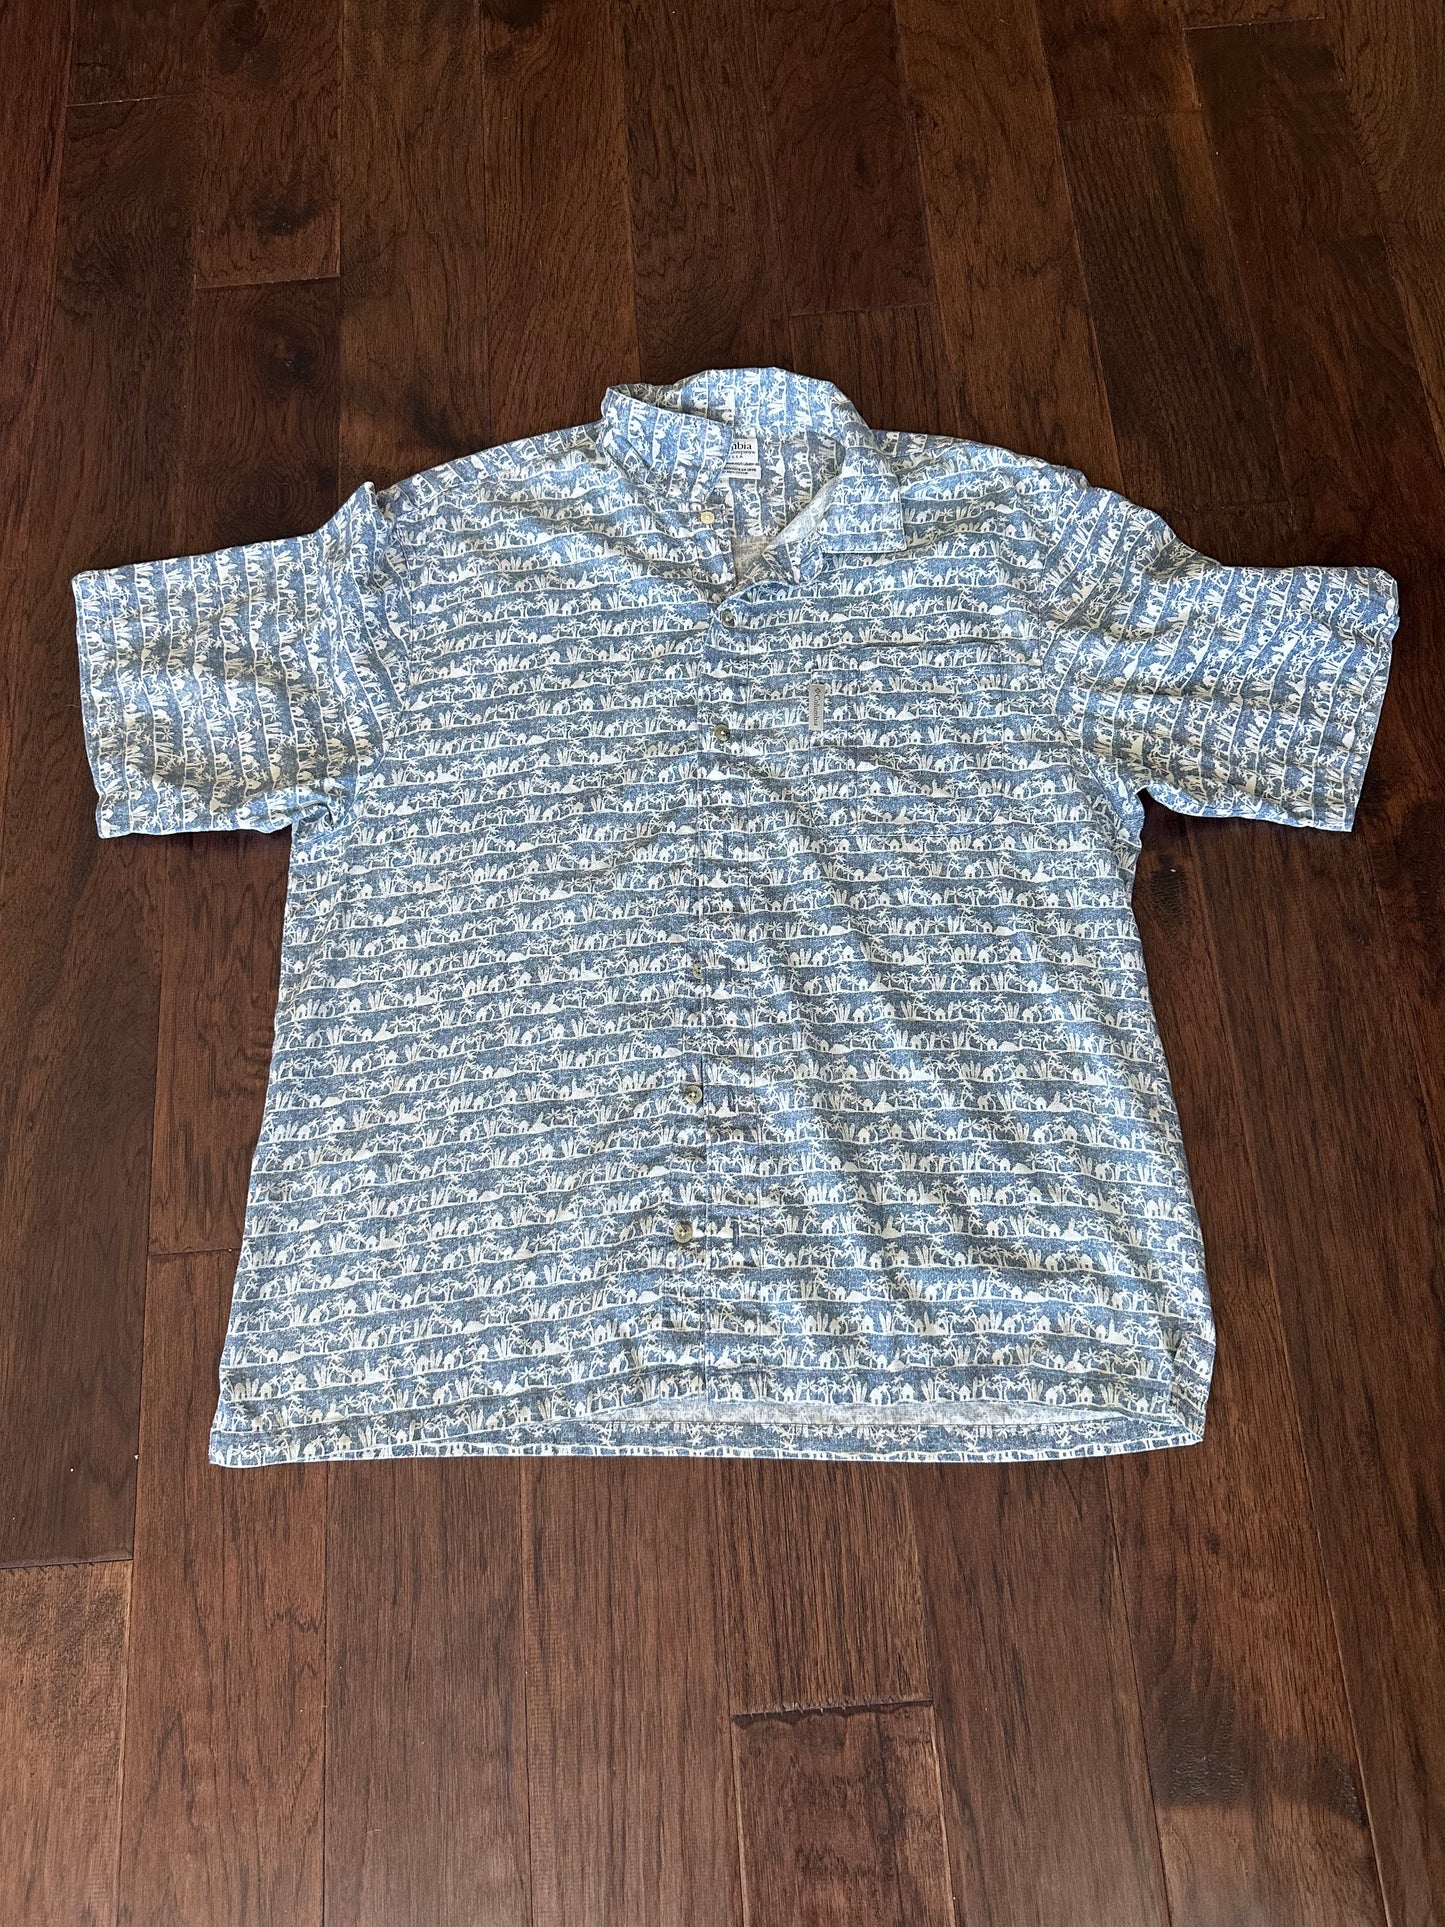 Columbia - Blue - Button Down - Large